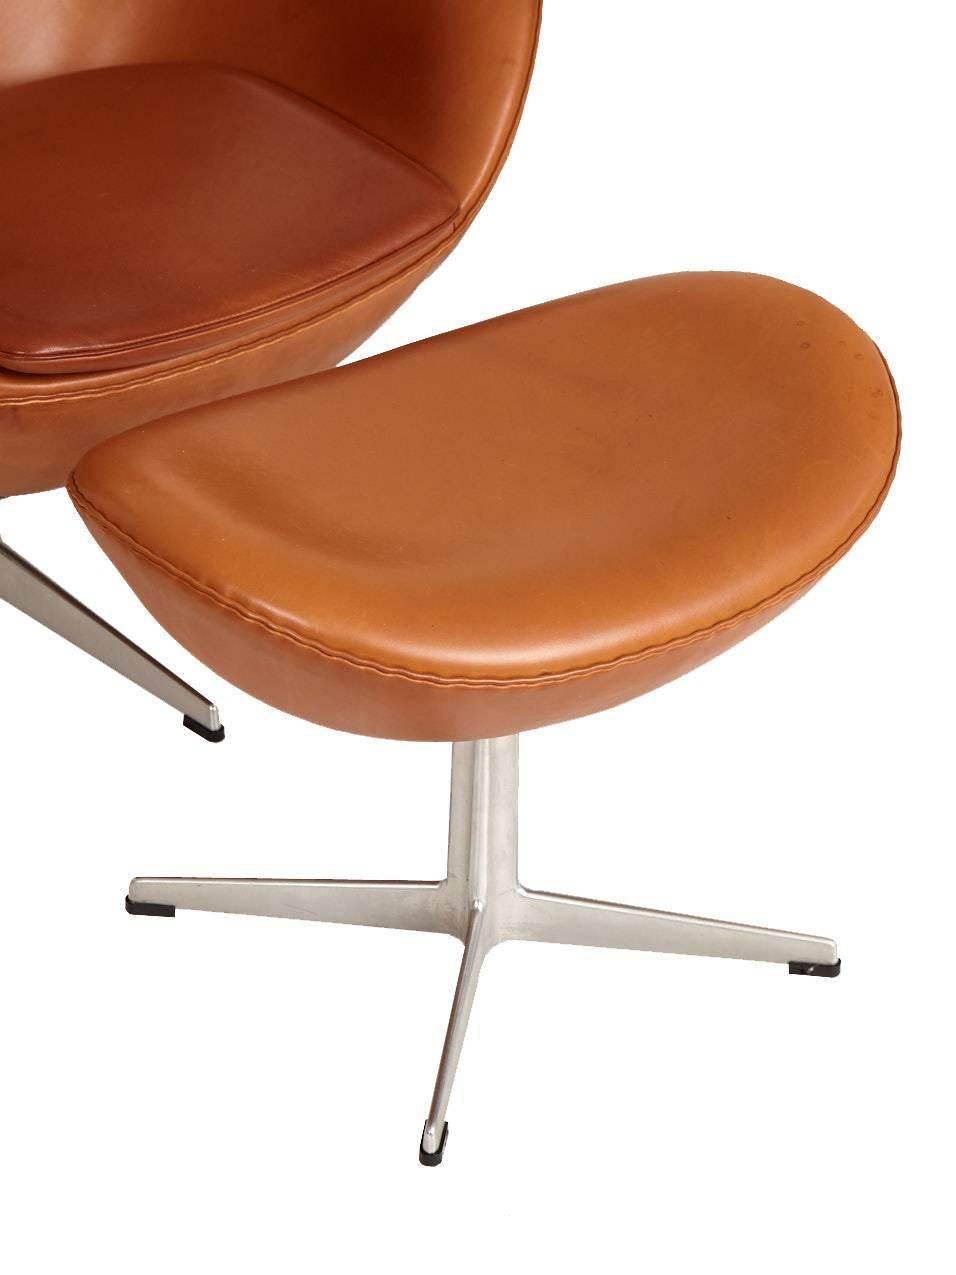 Mid-Century Modern Arne Jacobsen Leather Egg Chair and Ottoman, circa 1990s For Sale